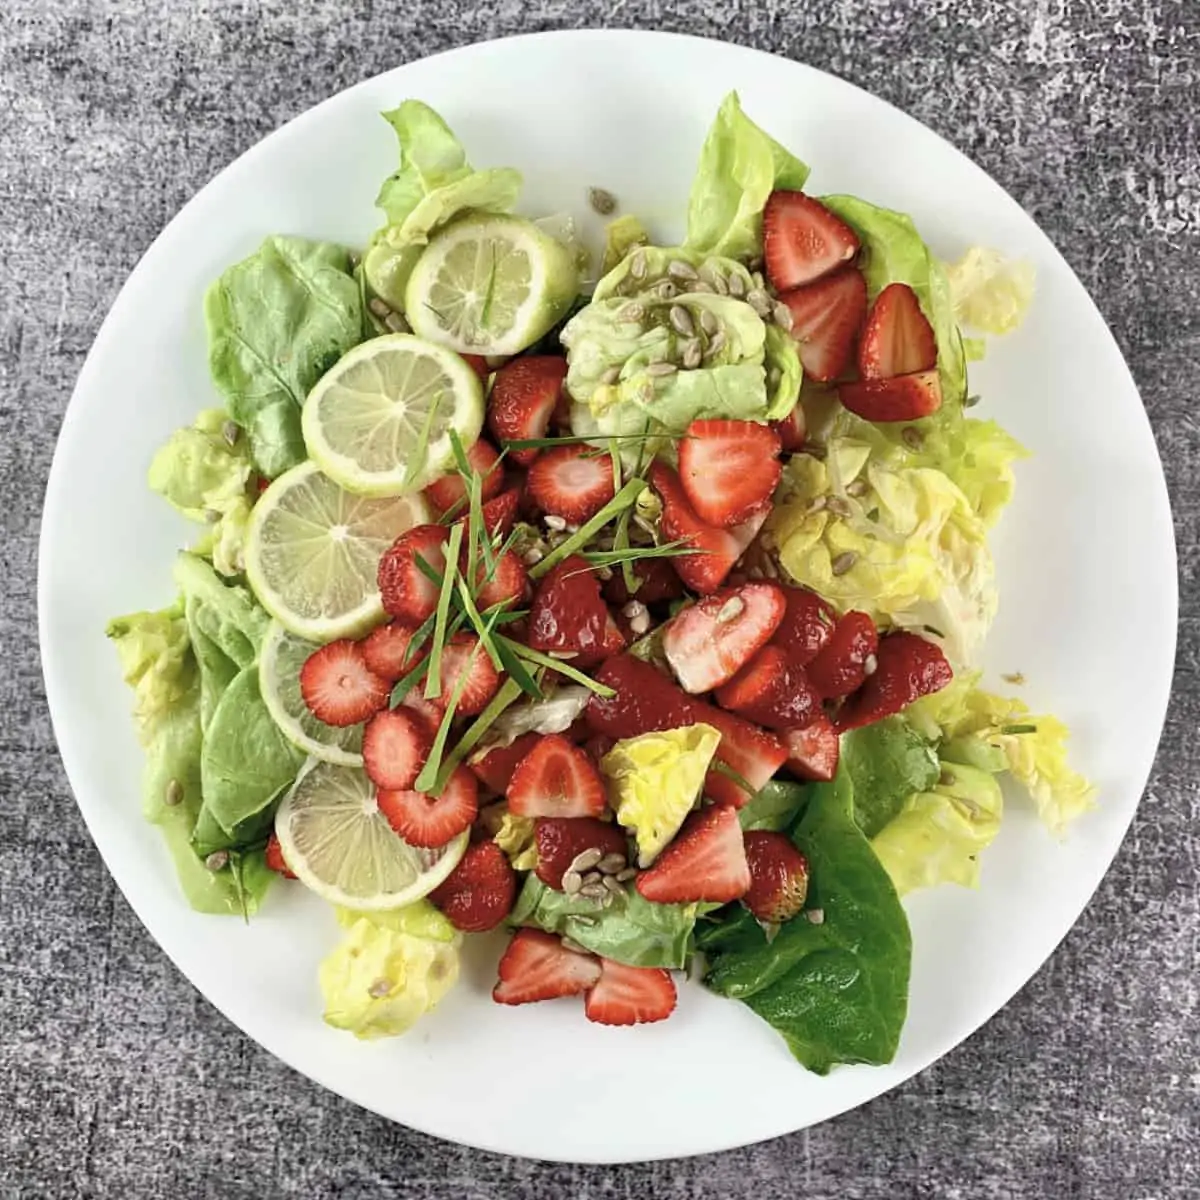 STRAWBERRY SALAD WITH LIME